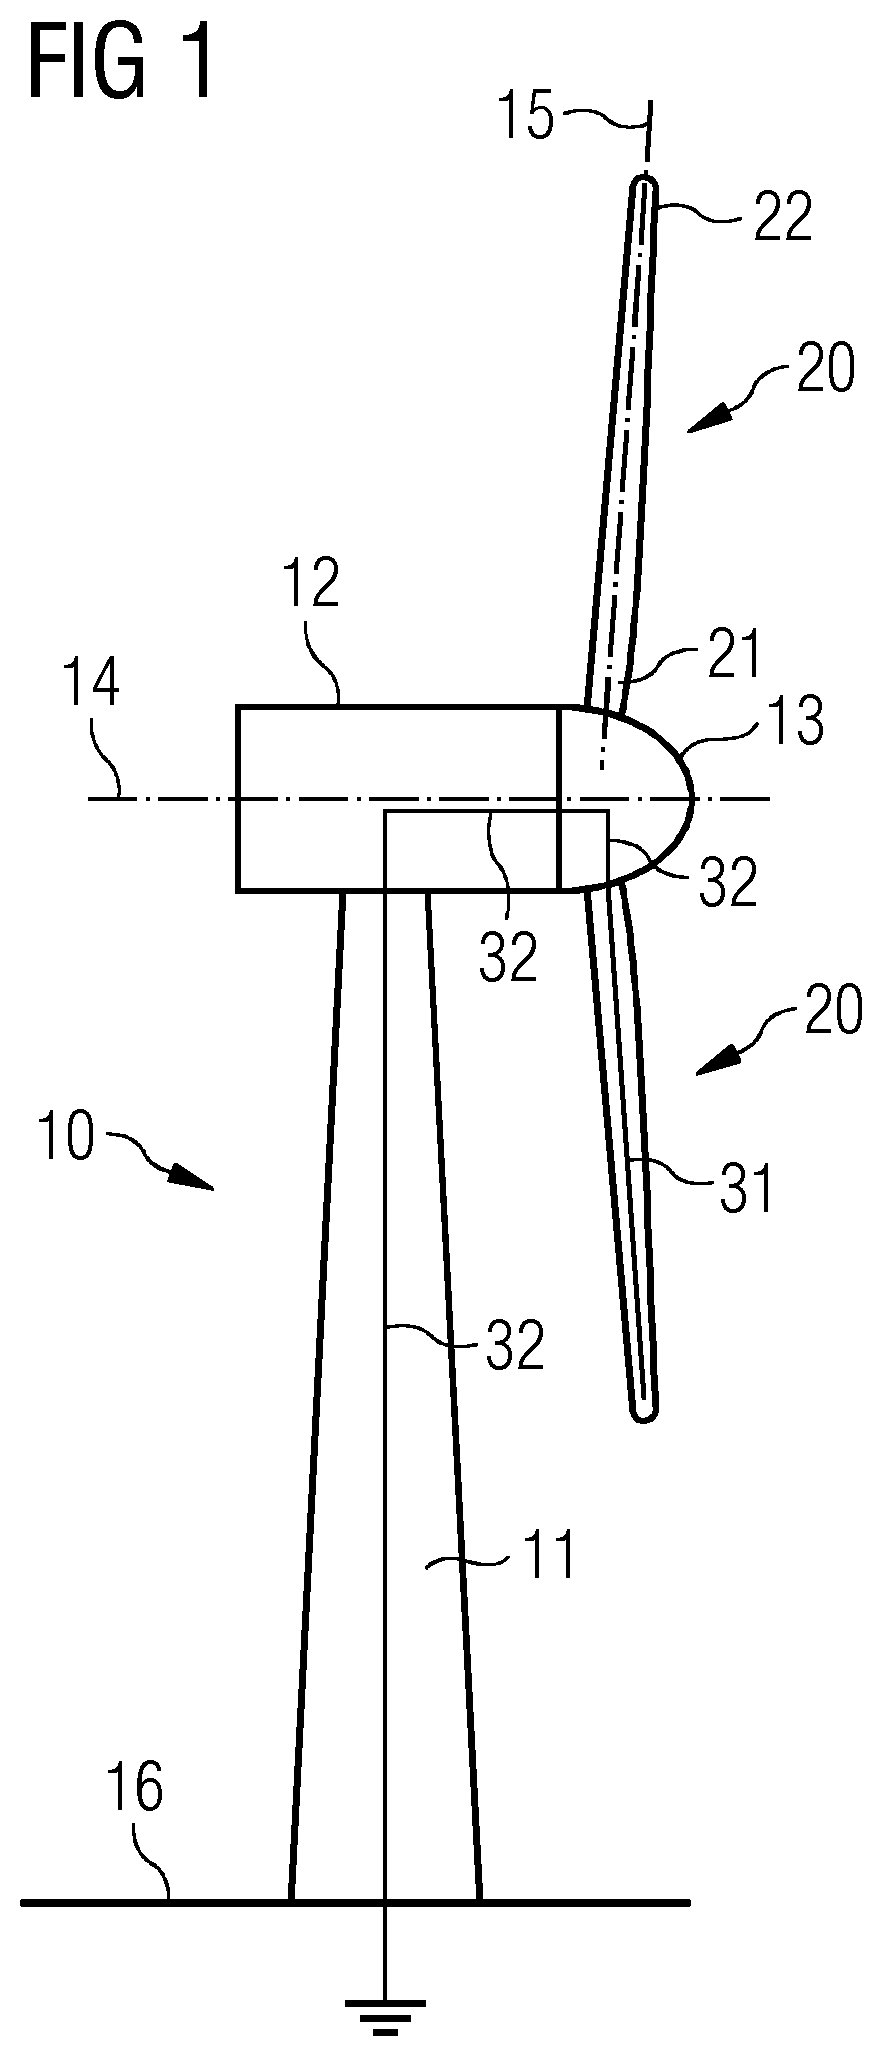 Lightning protection system for a wind turbine blade